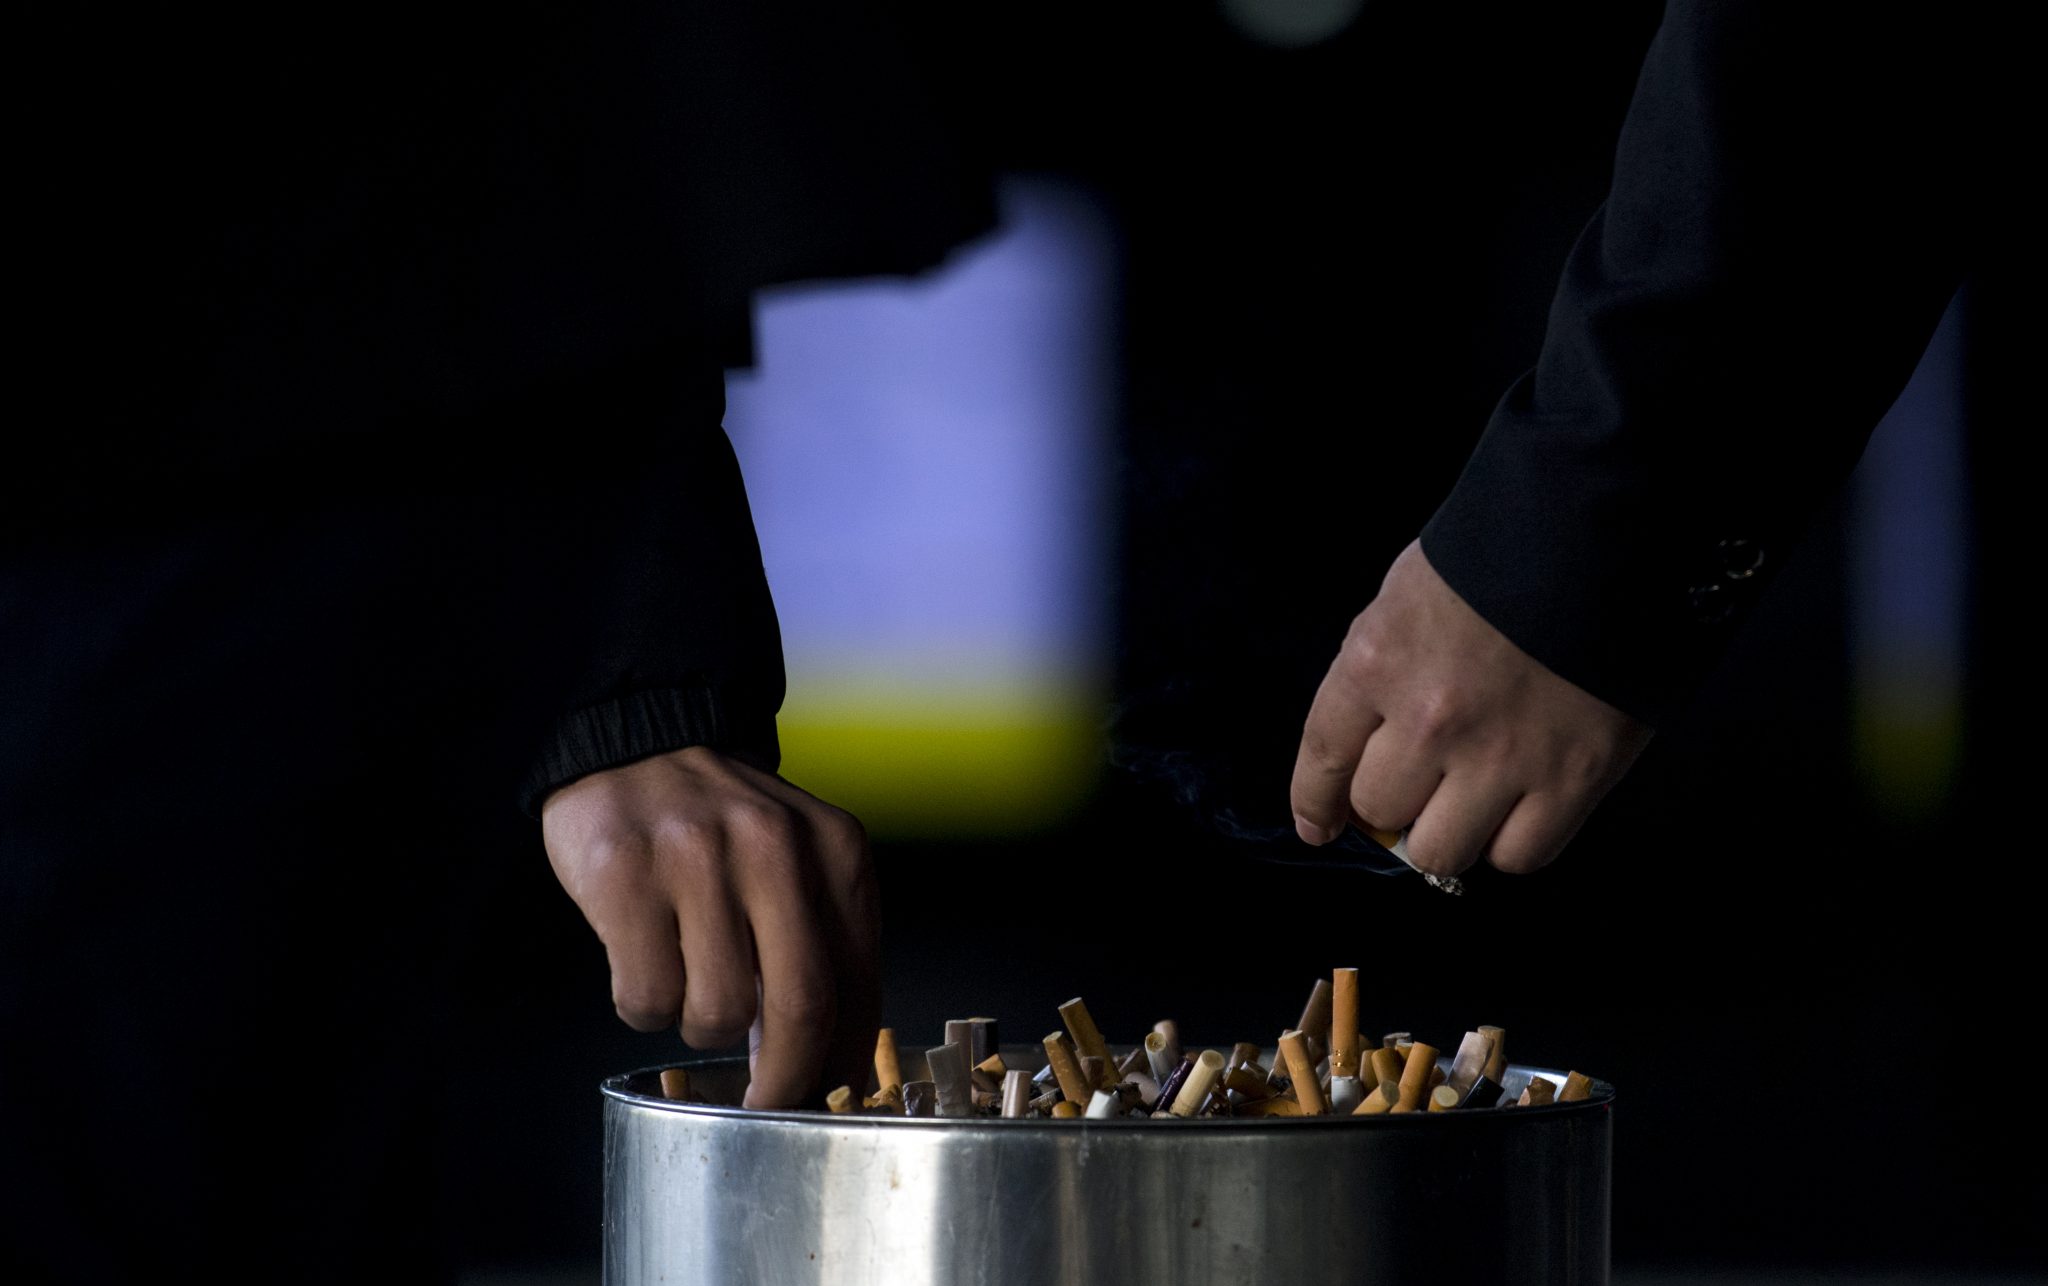 In this photo taken on February 28, 2017, a man grinds out his cigarette in an ashtray at a railway station in Shanghai.   Shanghai widened its ban on public smoking March 1 as China's biggest city steps up efforts to stub out the massive health threat despite conflicts of interest with the state-owned tobacco industry.  / AFP PHOTO / Johannes EISELE